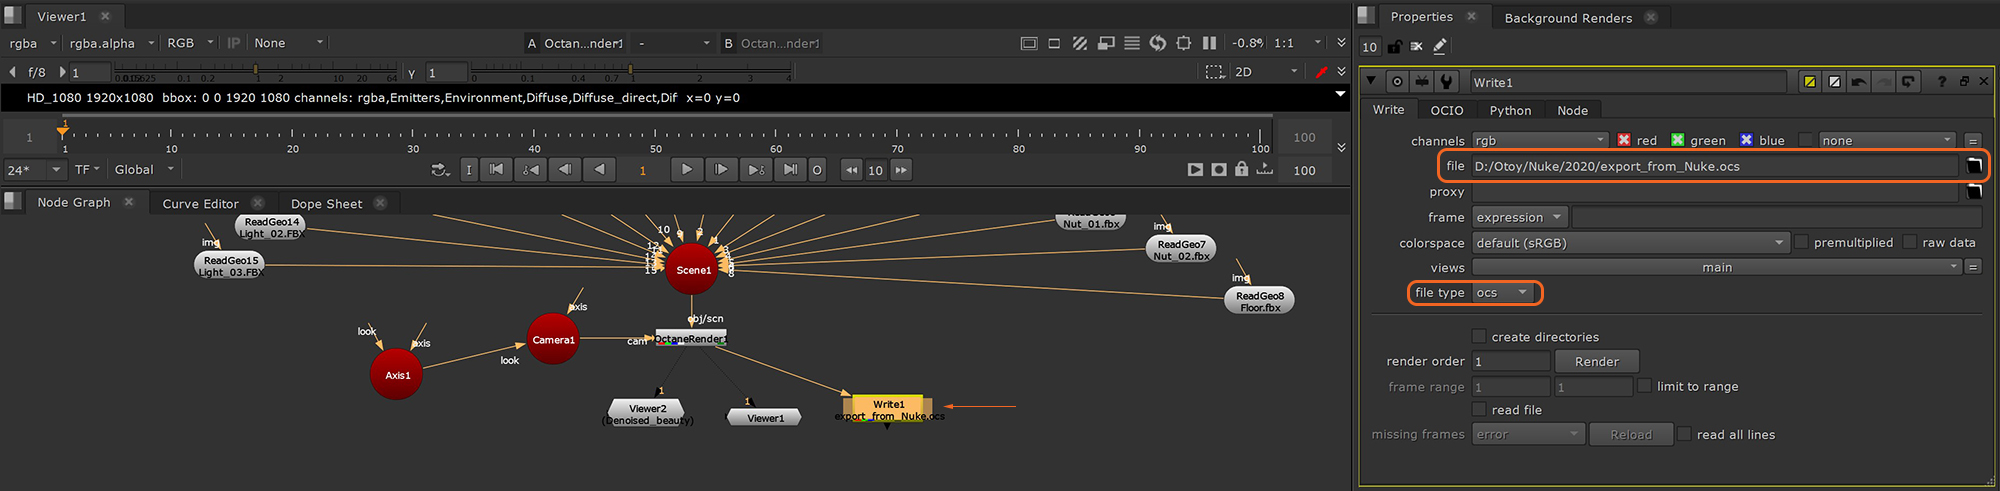 Exporting_Animations_to_Octane_Standalone_Fig01_Nuke_v2020